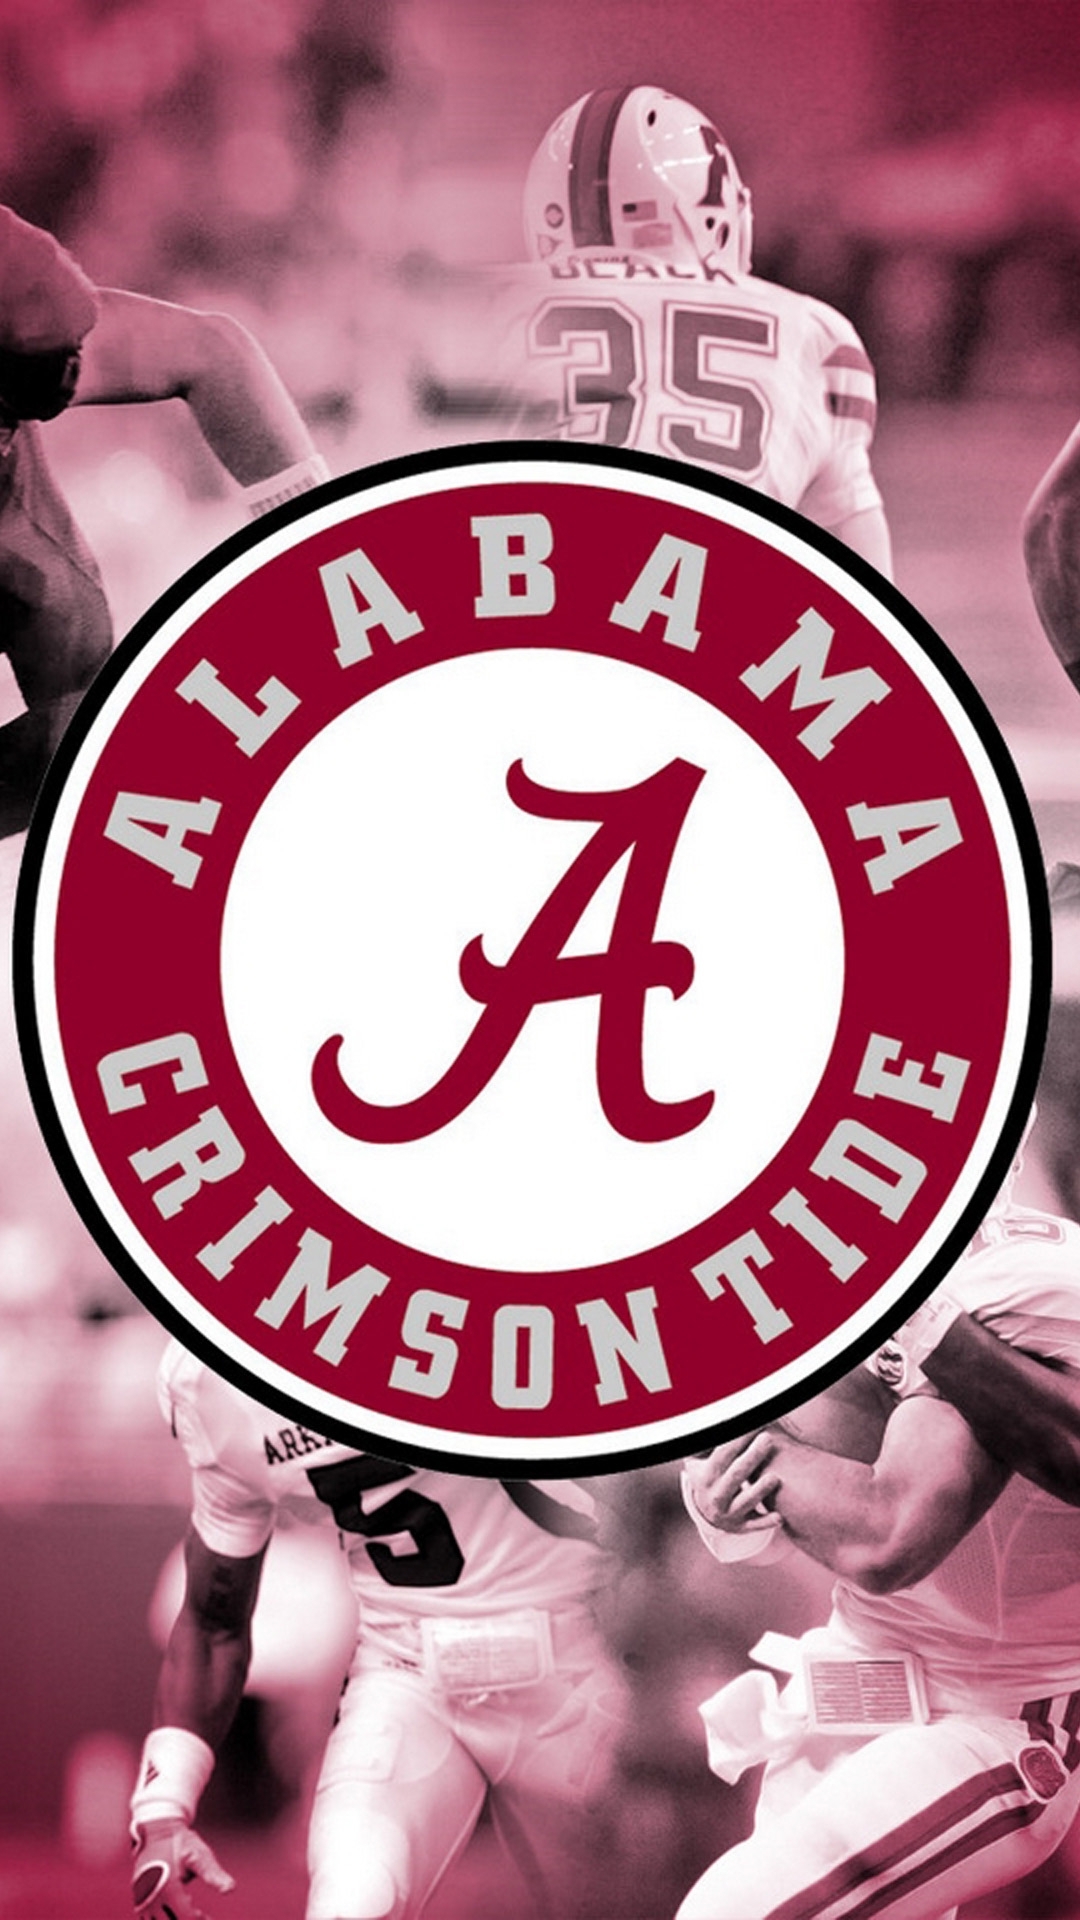 10 Top Alabama Roll Tide Wallpapers FULL HD 1080p For PC Background 2020